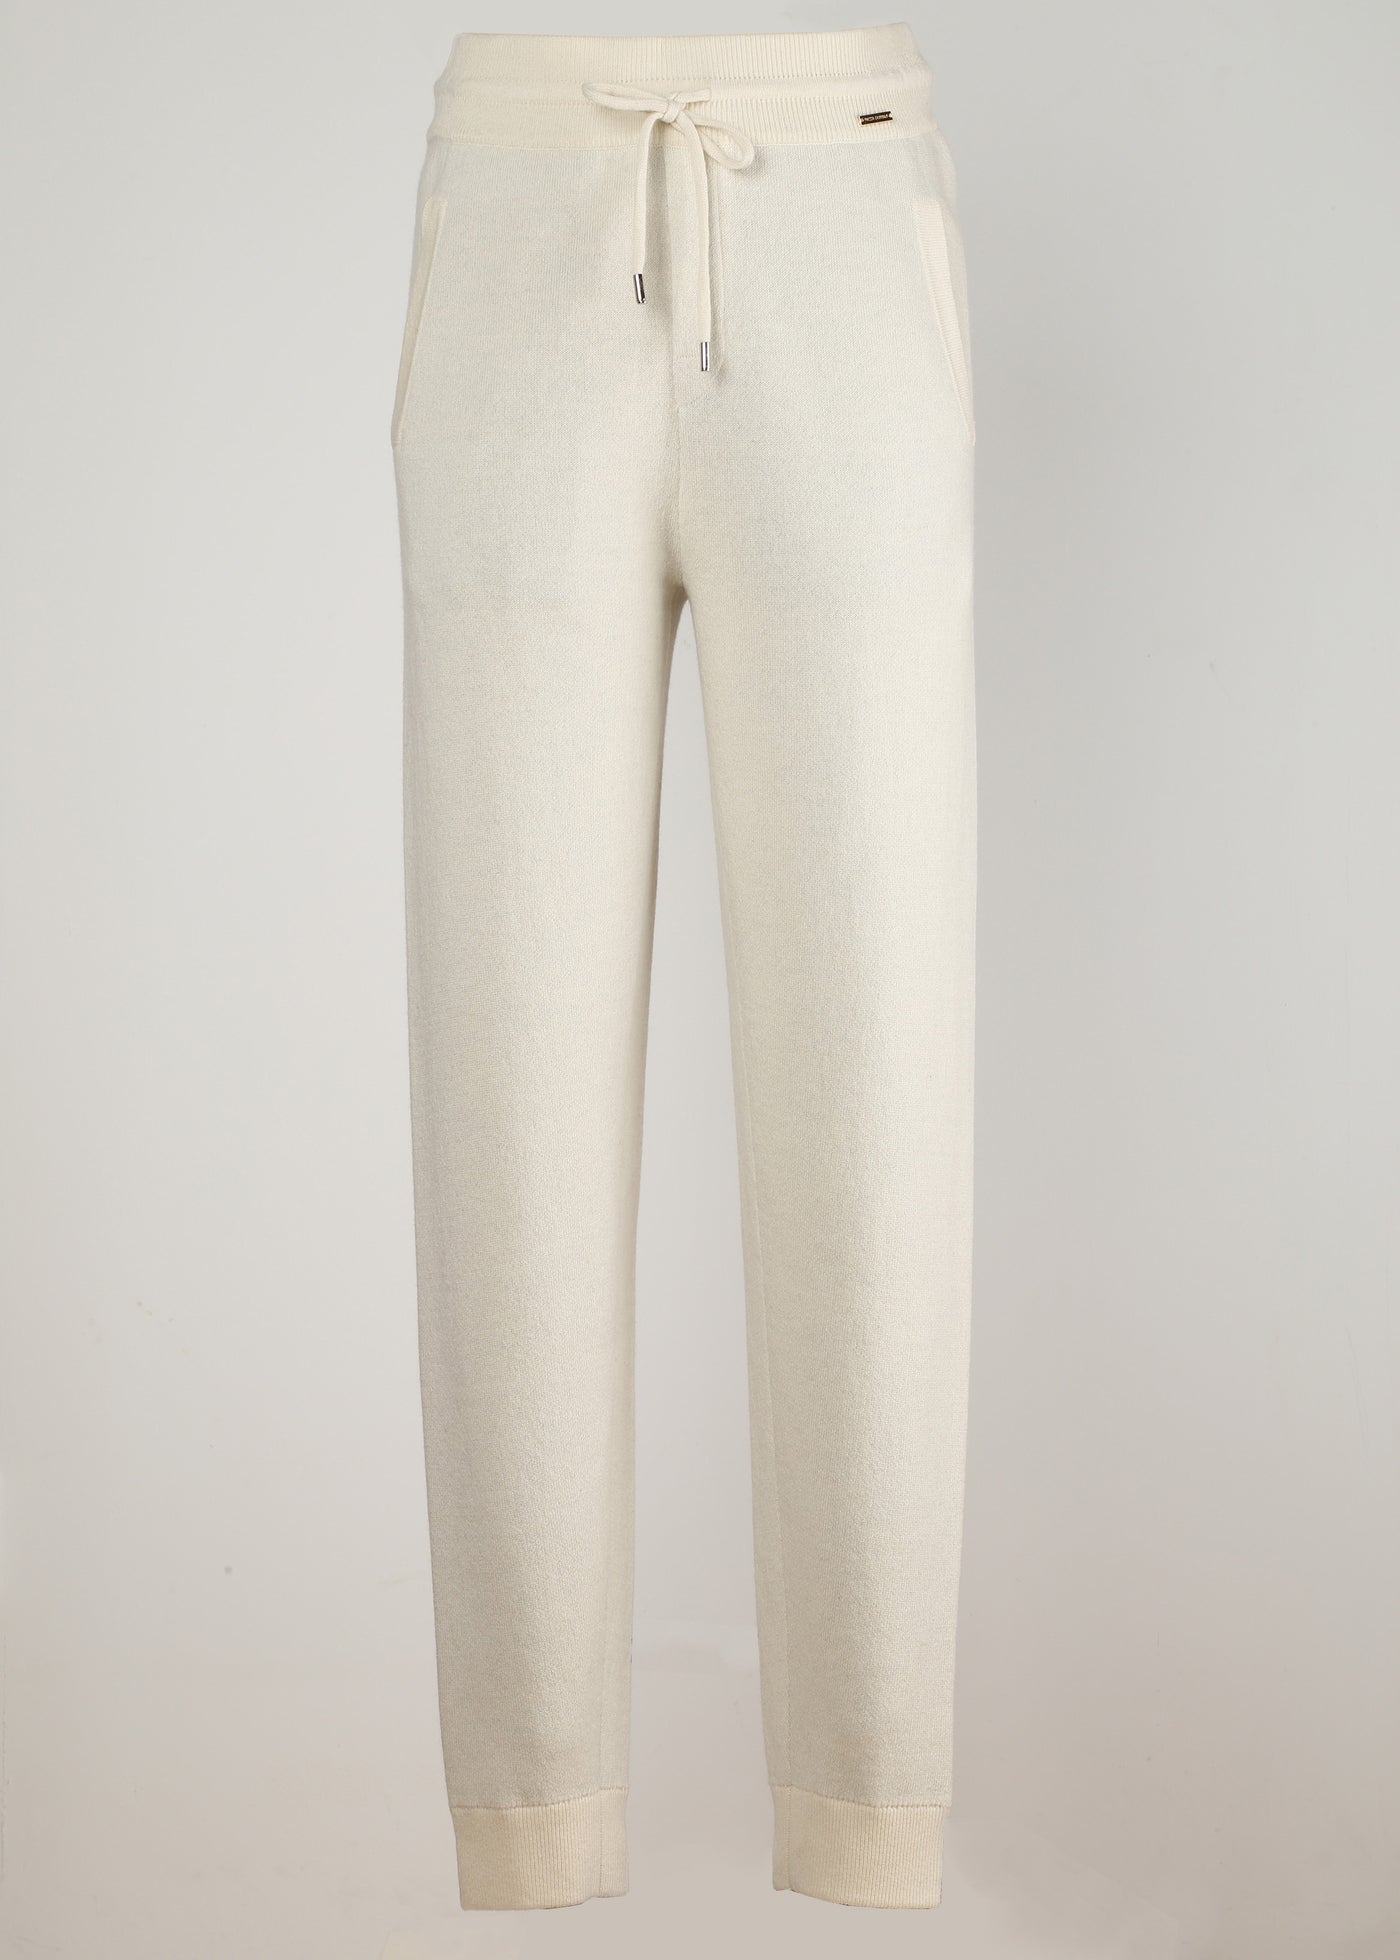 Men's Relaxed Cashmere Pants